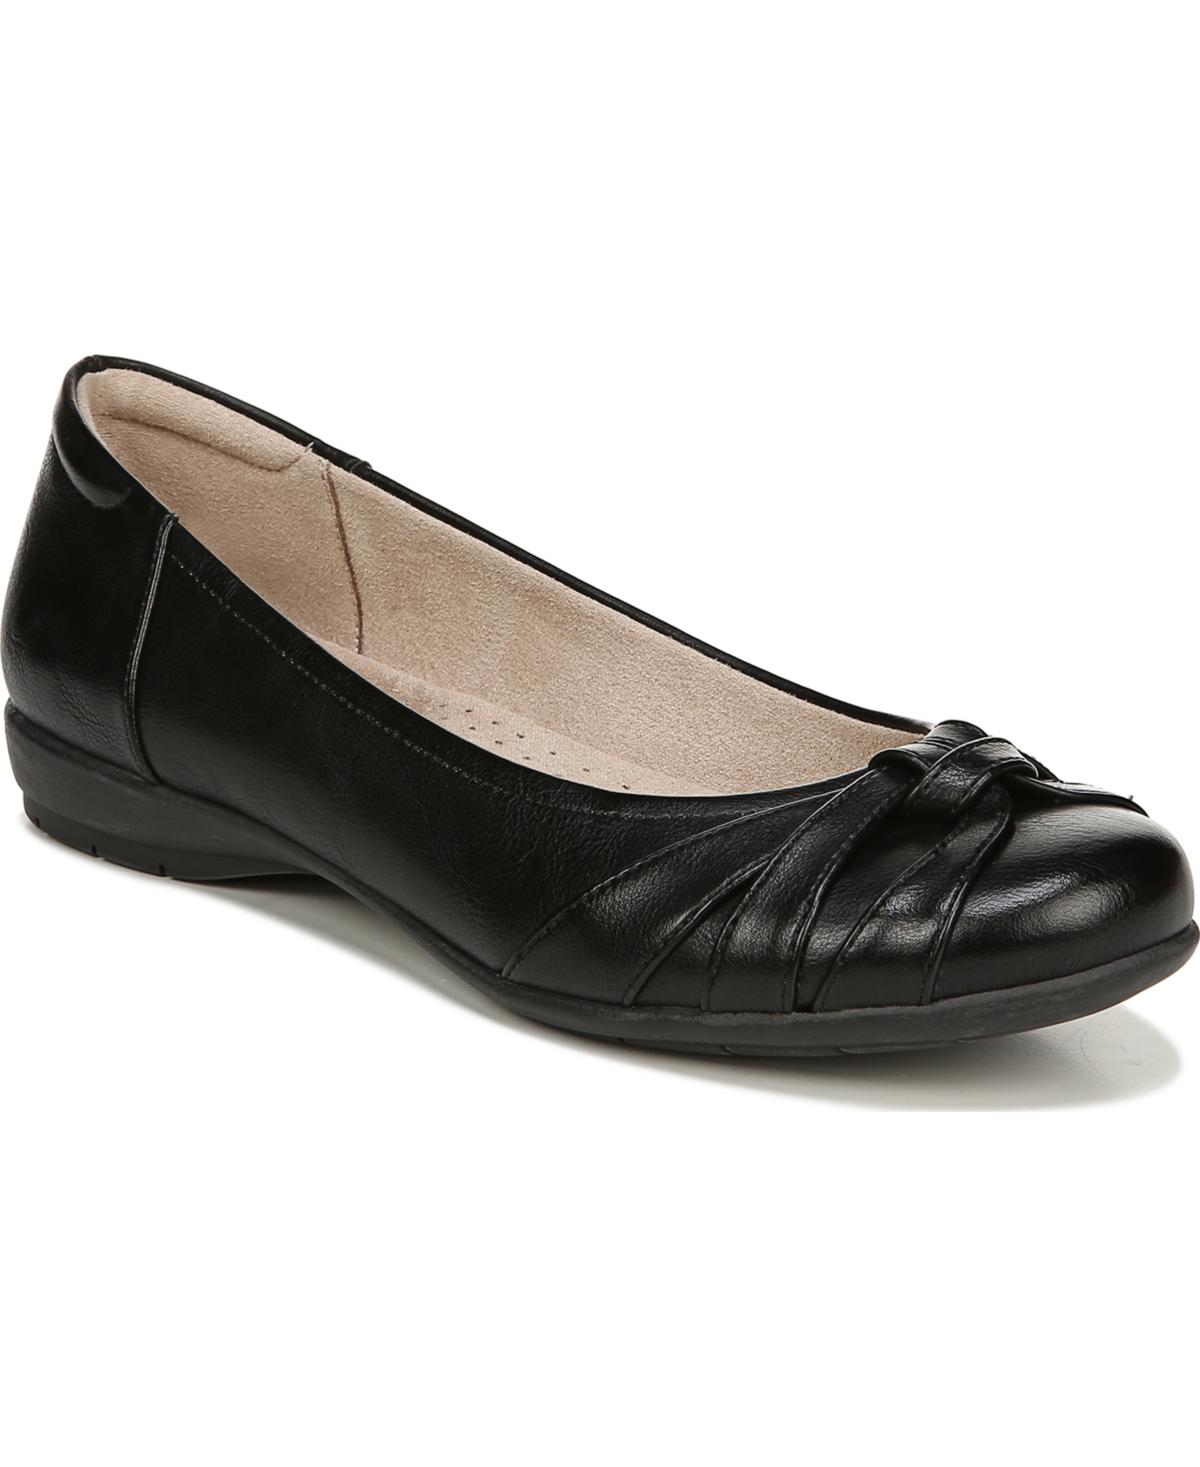 Gift Flats - Dark Brown Faux Leather